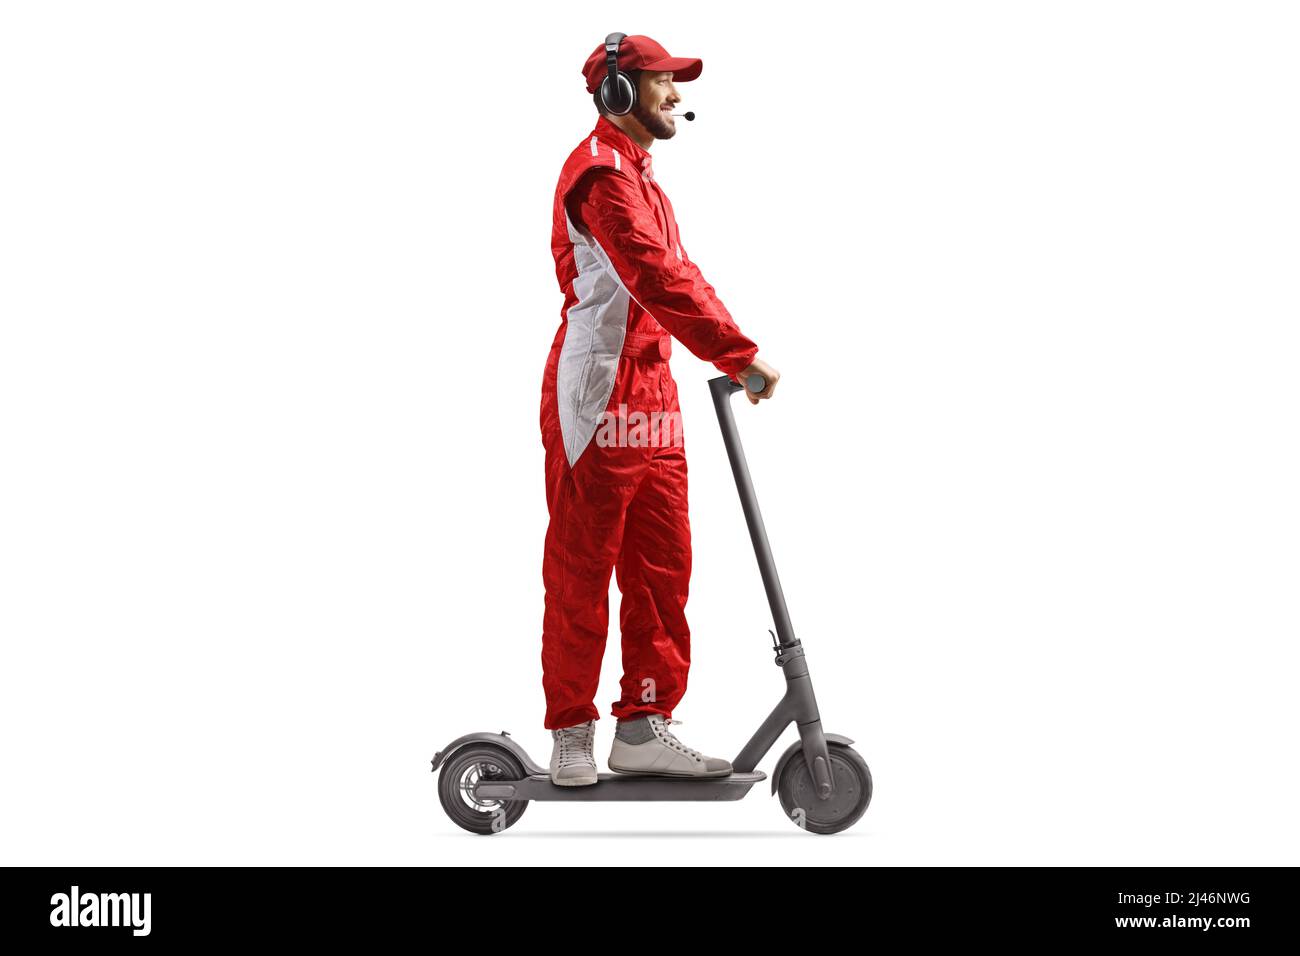 Full length profile shot of a race team member riding an electric scooter isolated on white background Stock Photo